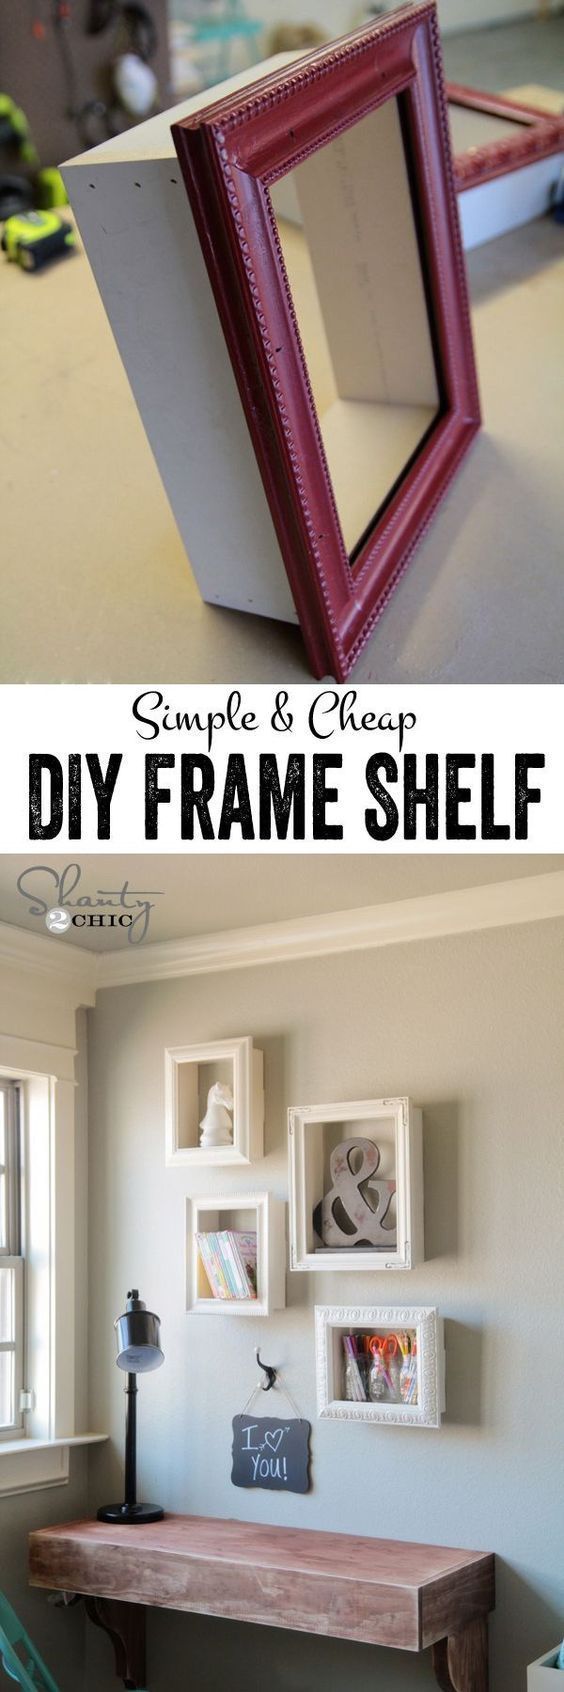 DIY Frames for Wall Decor:  Turn the simple frames from the local thrift store into these expensive frames by attaching wood to